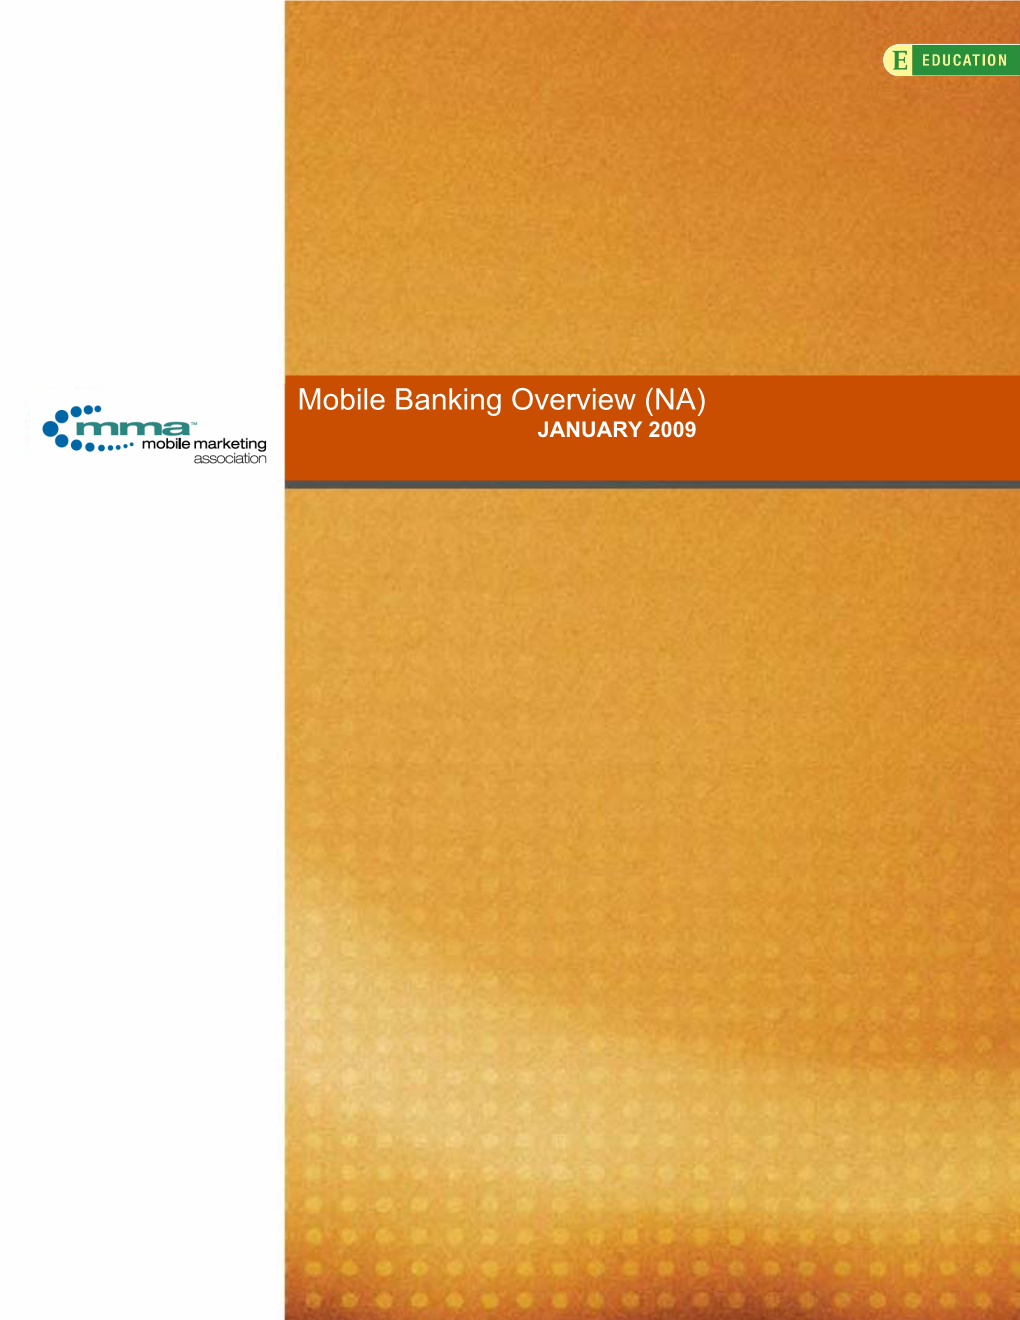 Mobile Banking Overview (NA) JANUARY 2009 Mobile Banking Overview (NA)